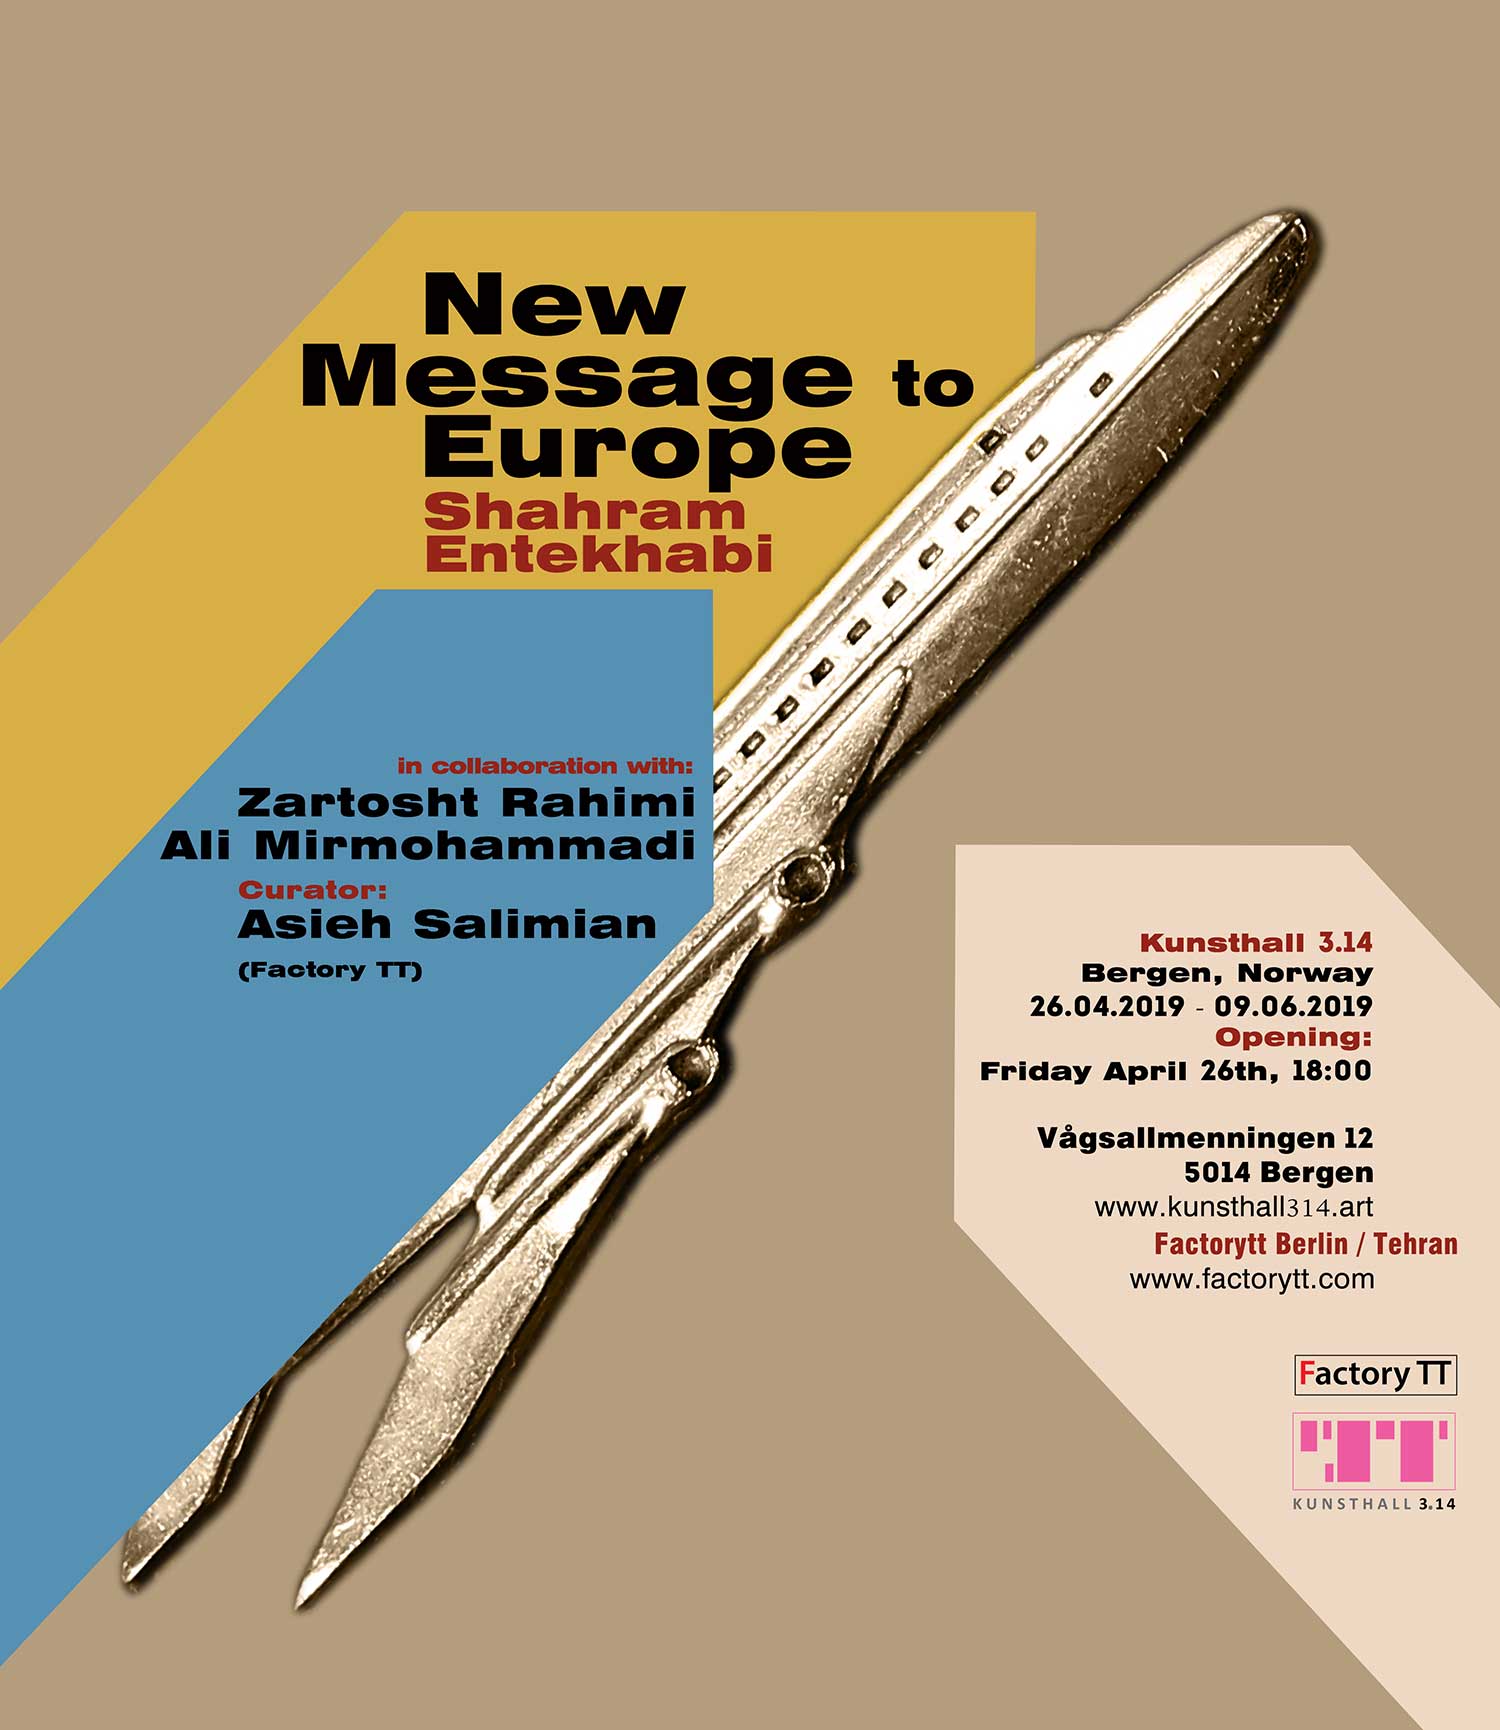 New message to Europe; April - June 2019; Kunsthall 3.14, Bergen, Norway; by Shahram Entekhabi; in collaboration with Zartosht Rahimi and Seid Ali Mirmohammadi; Curated by: Asieh Salimian